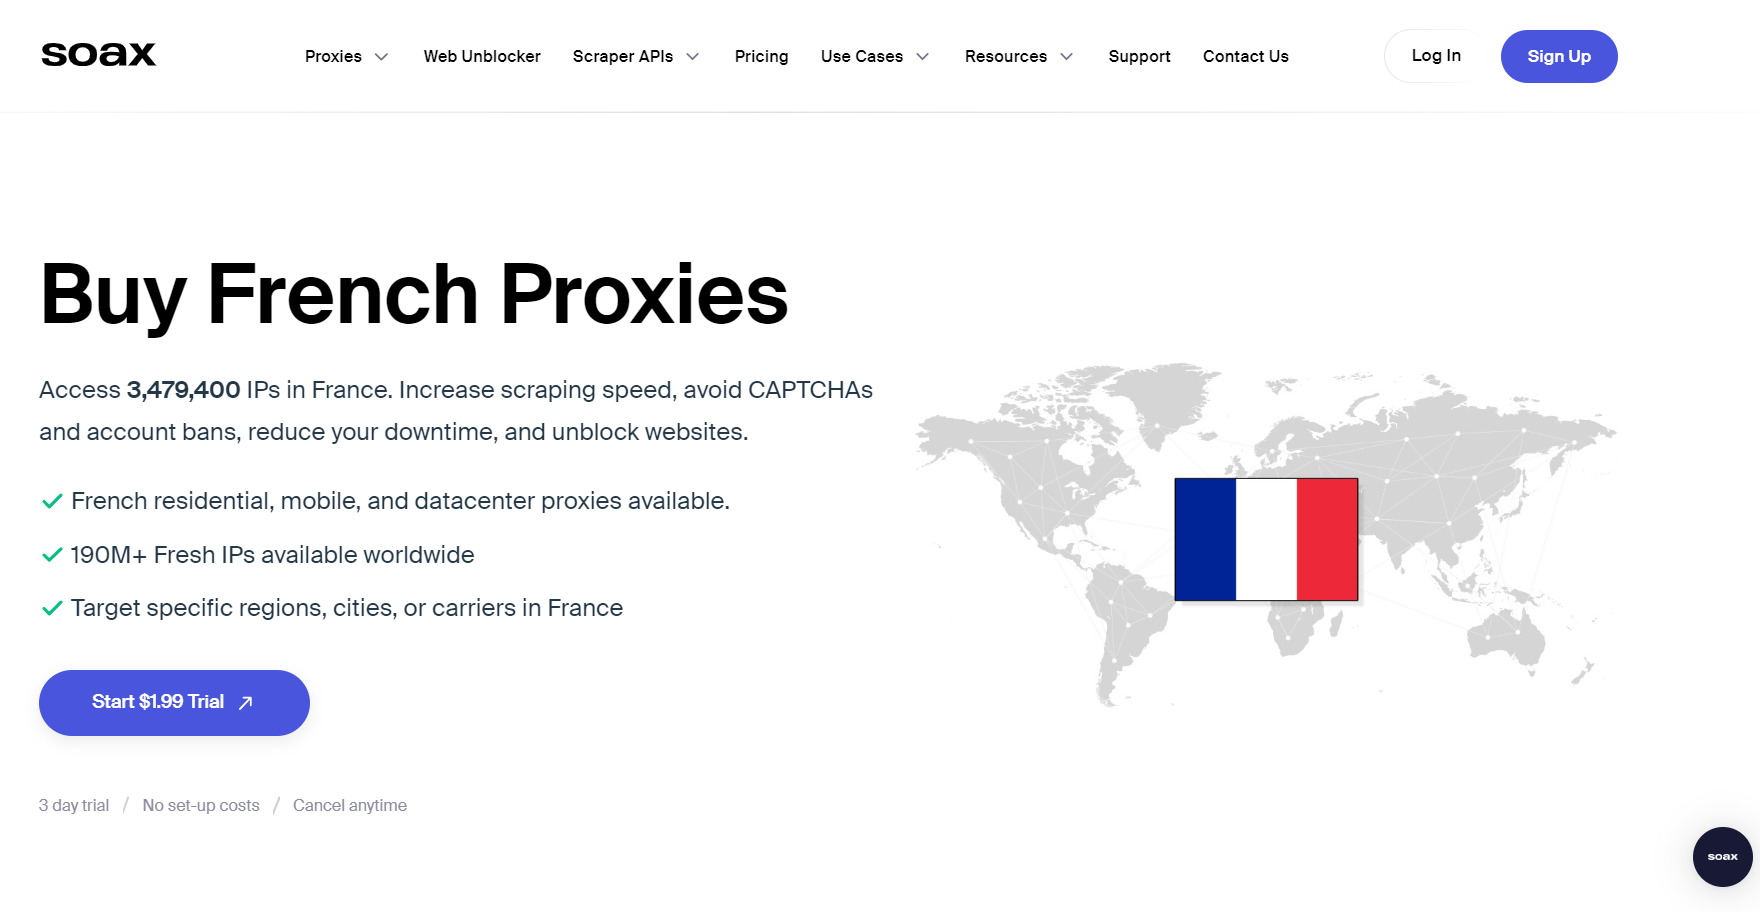 Best French Proxies - SOAX